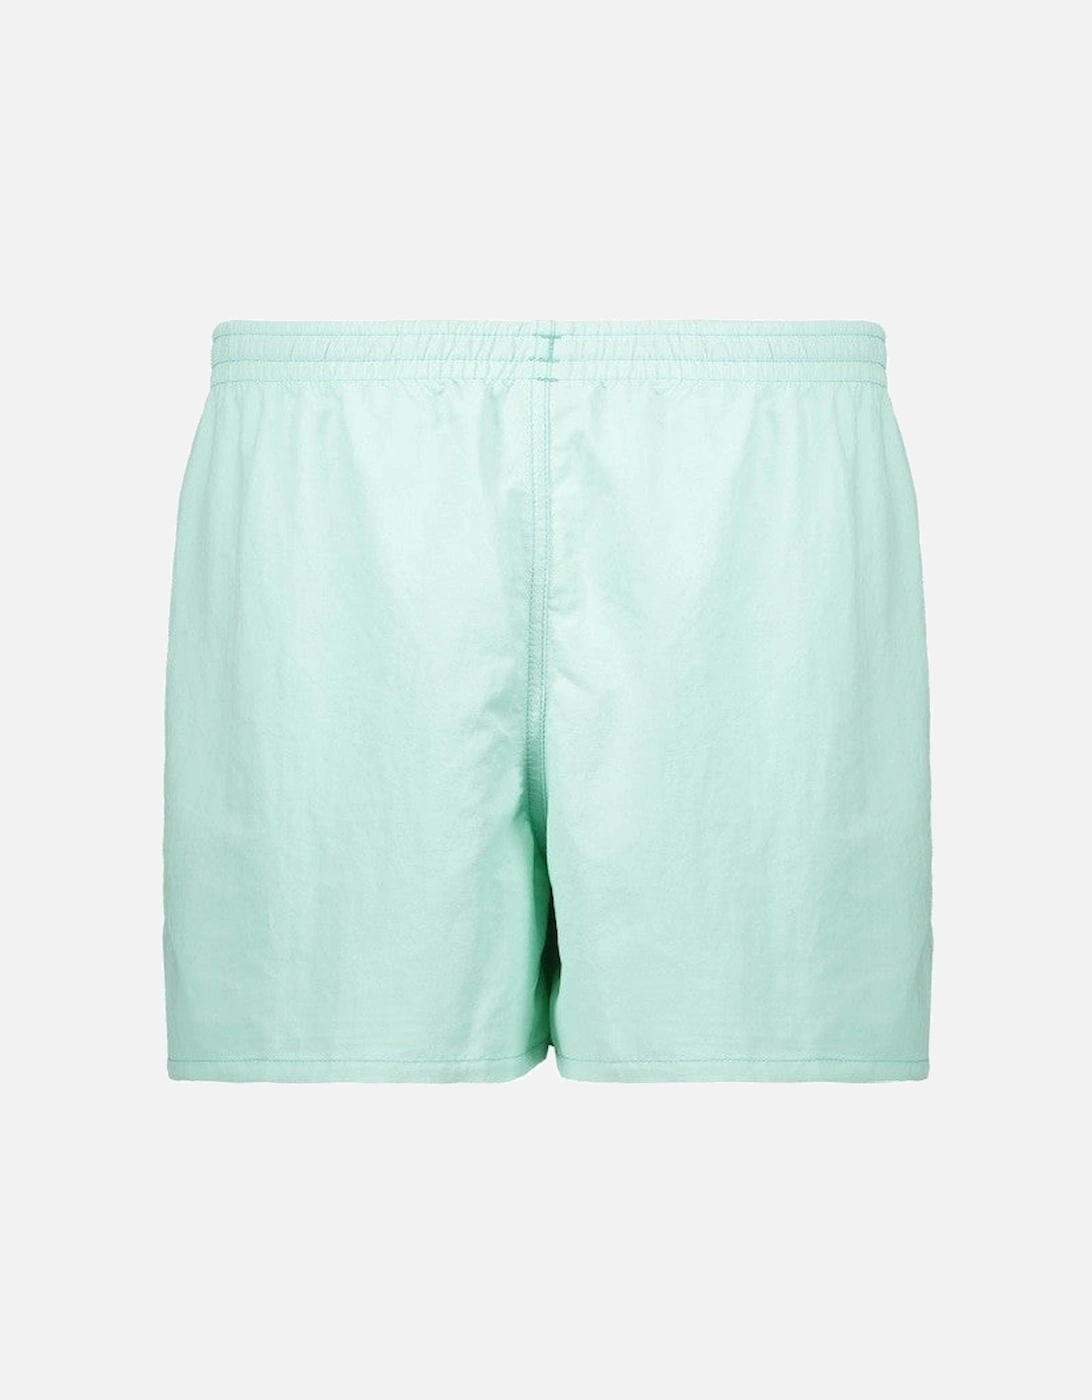 Women's  Baggie Shorts - Early Teal